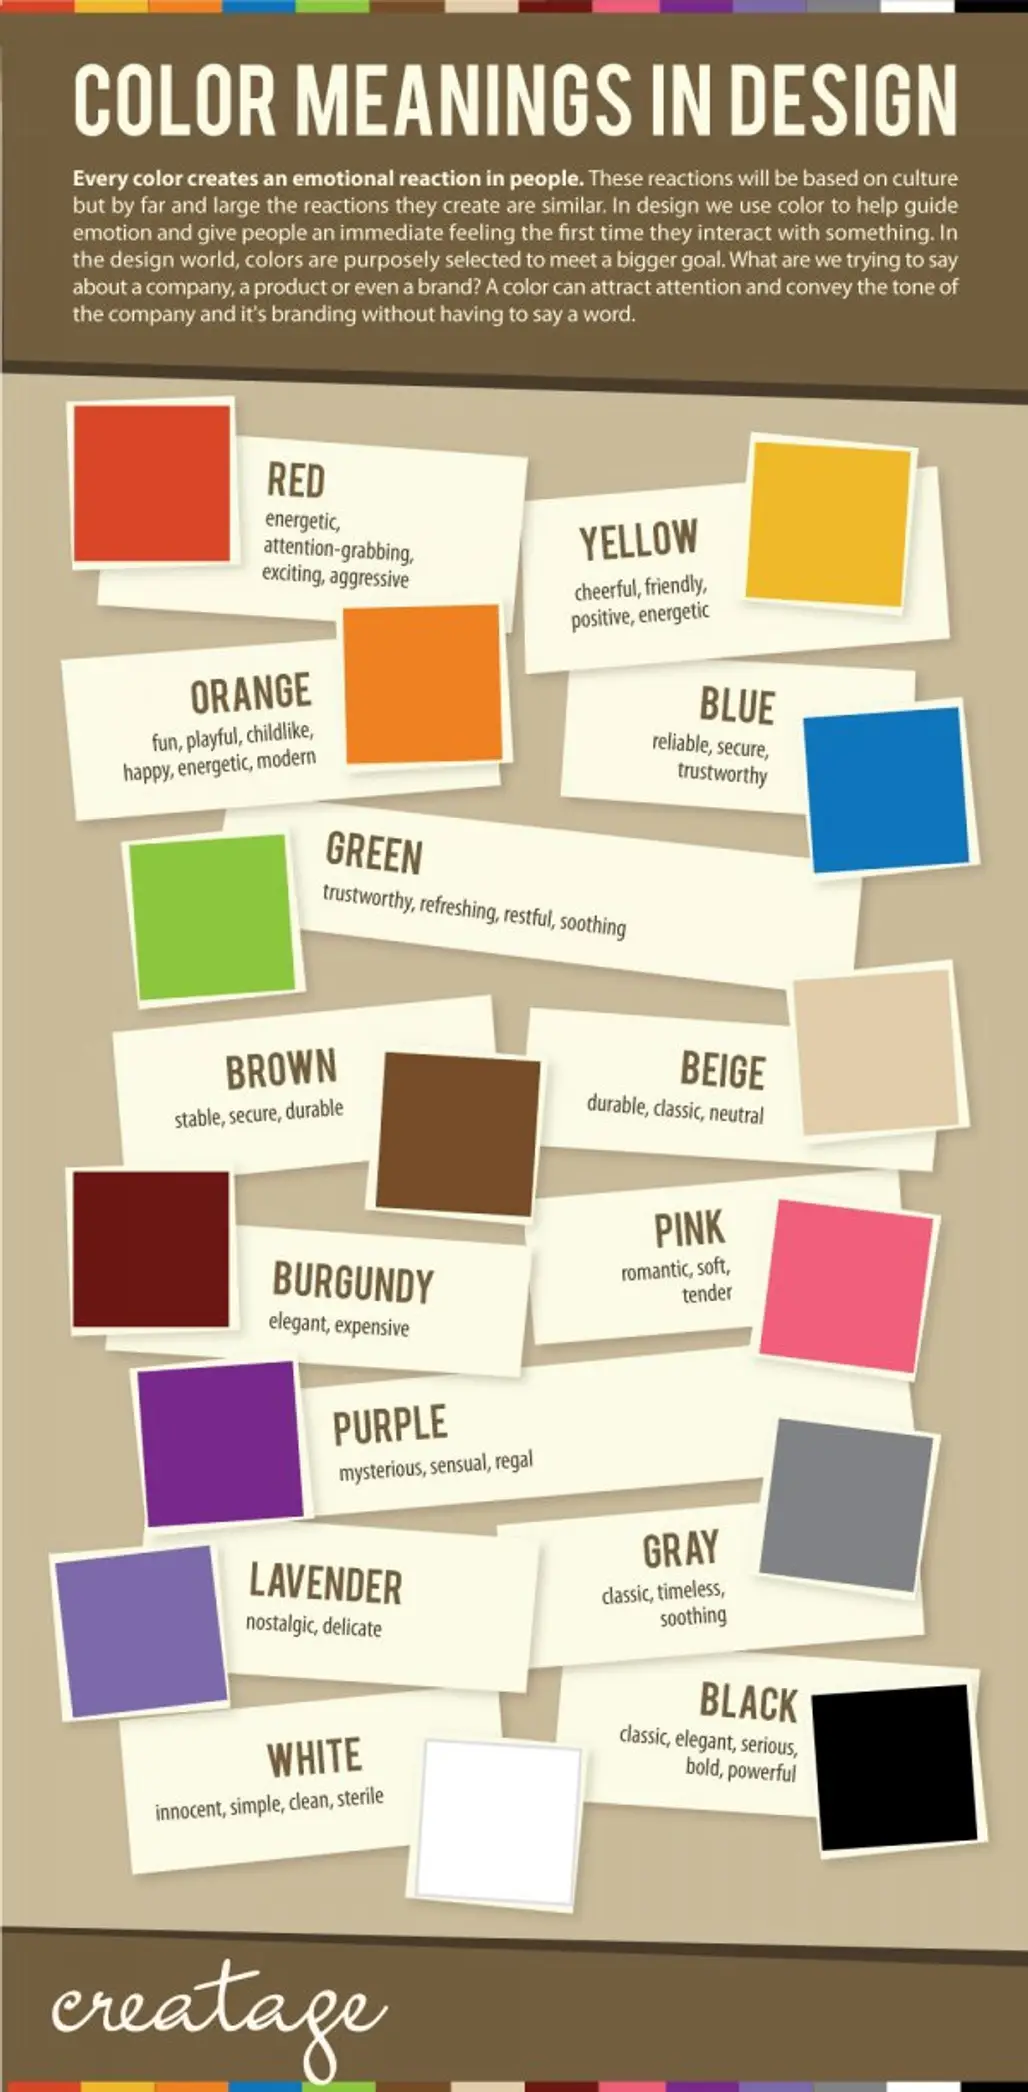 Color Meanings in Design